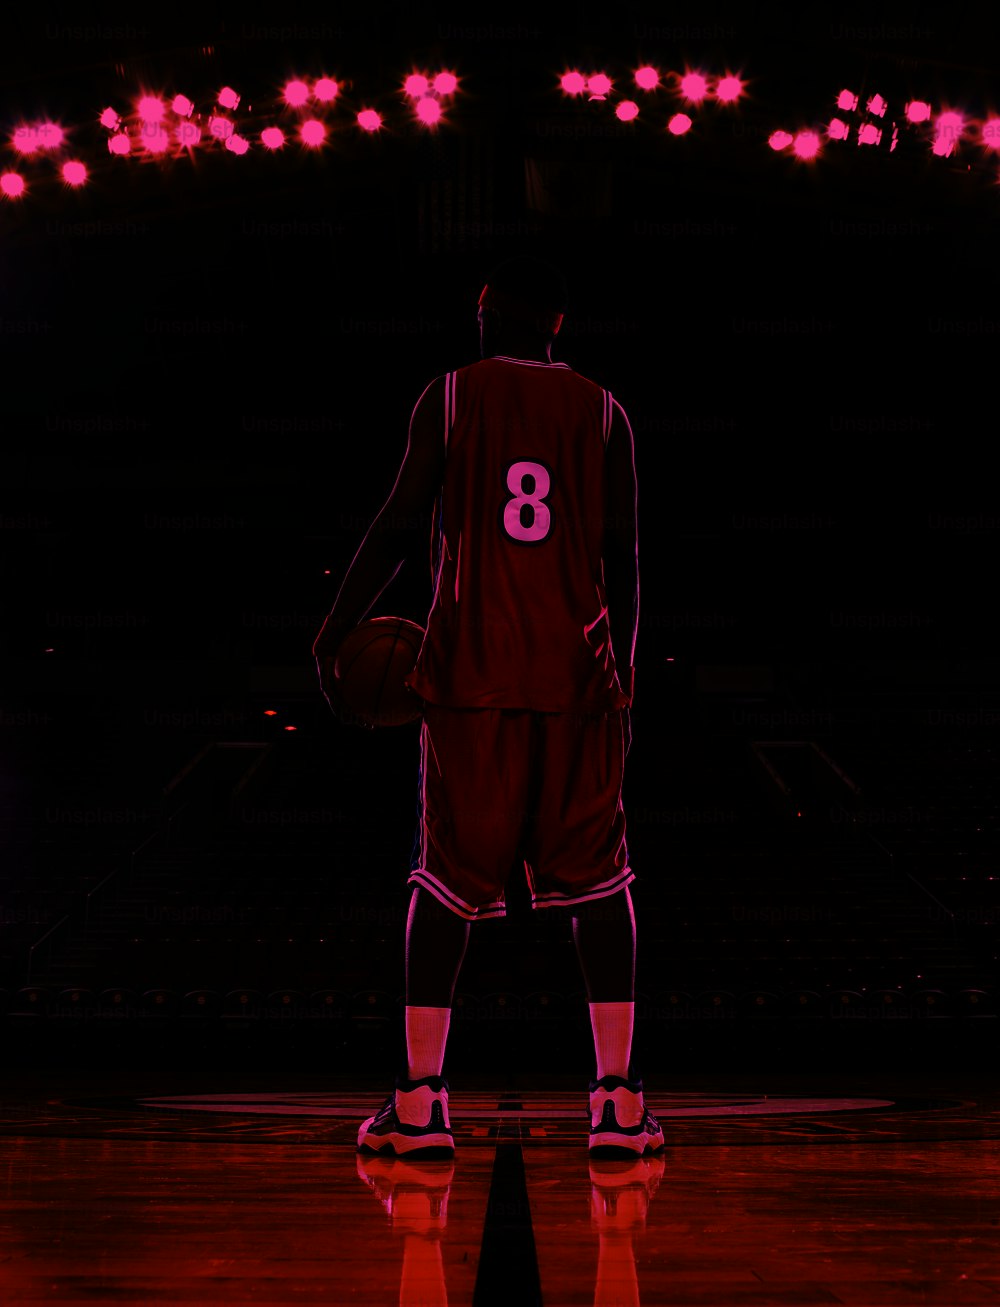 a basketball player in a red uniform holding a basketball